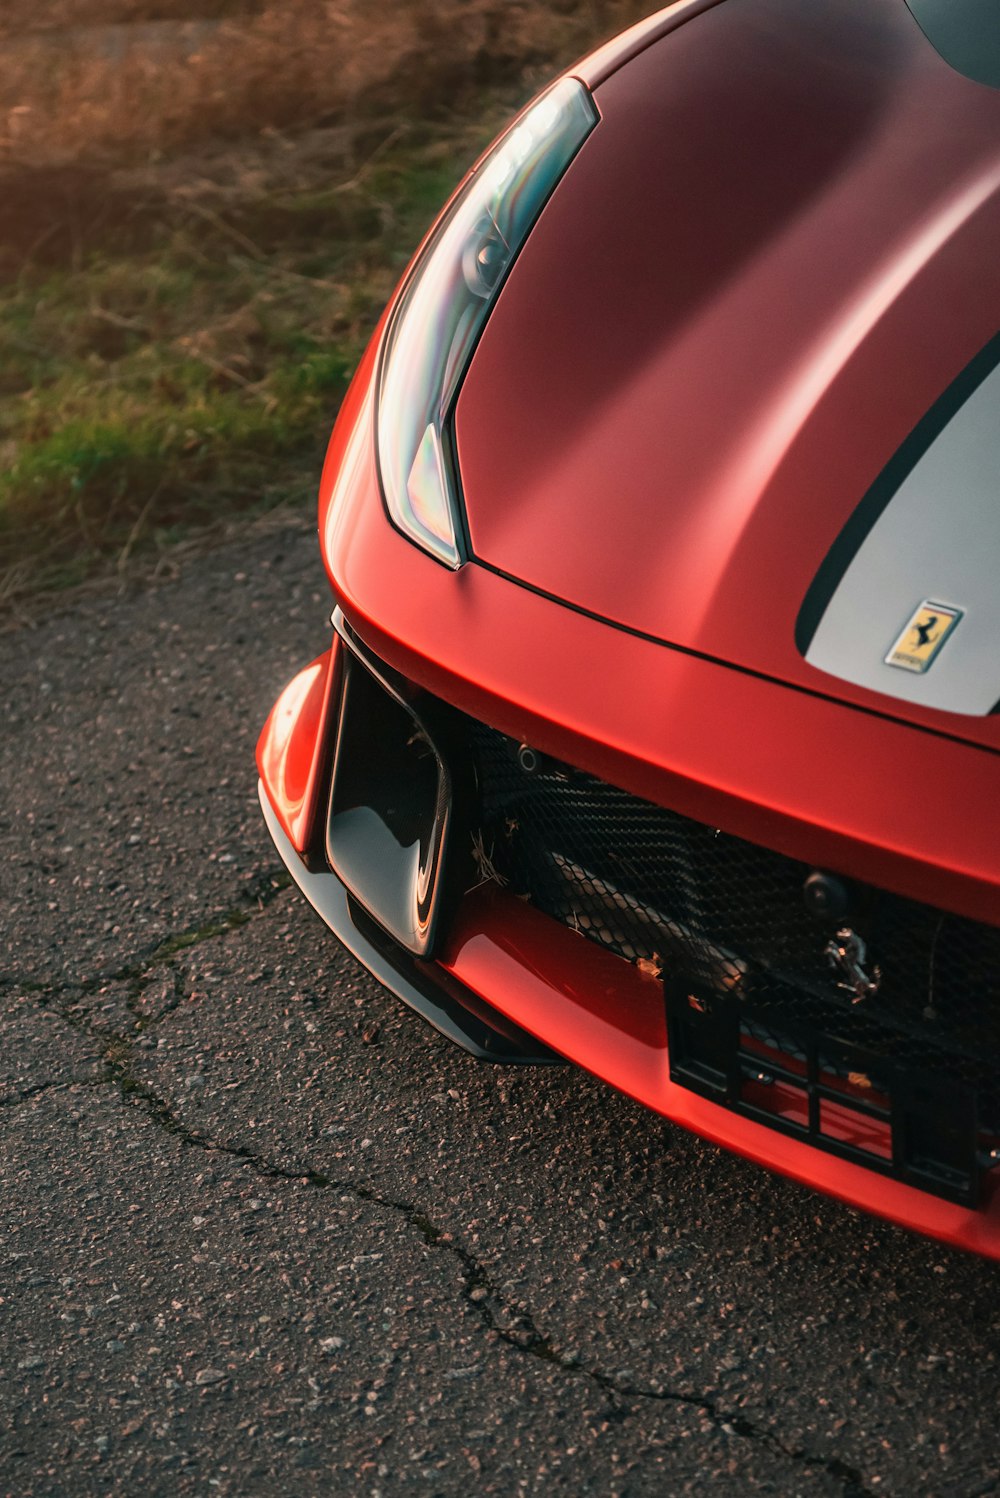 the front end of a red sports car